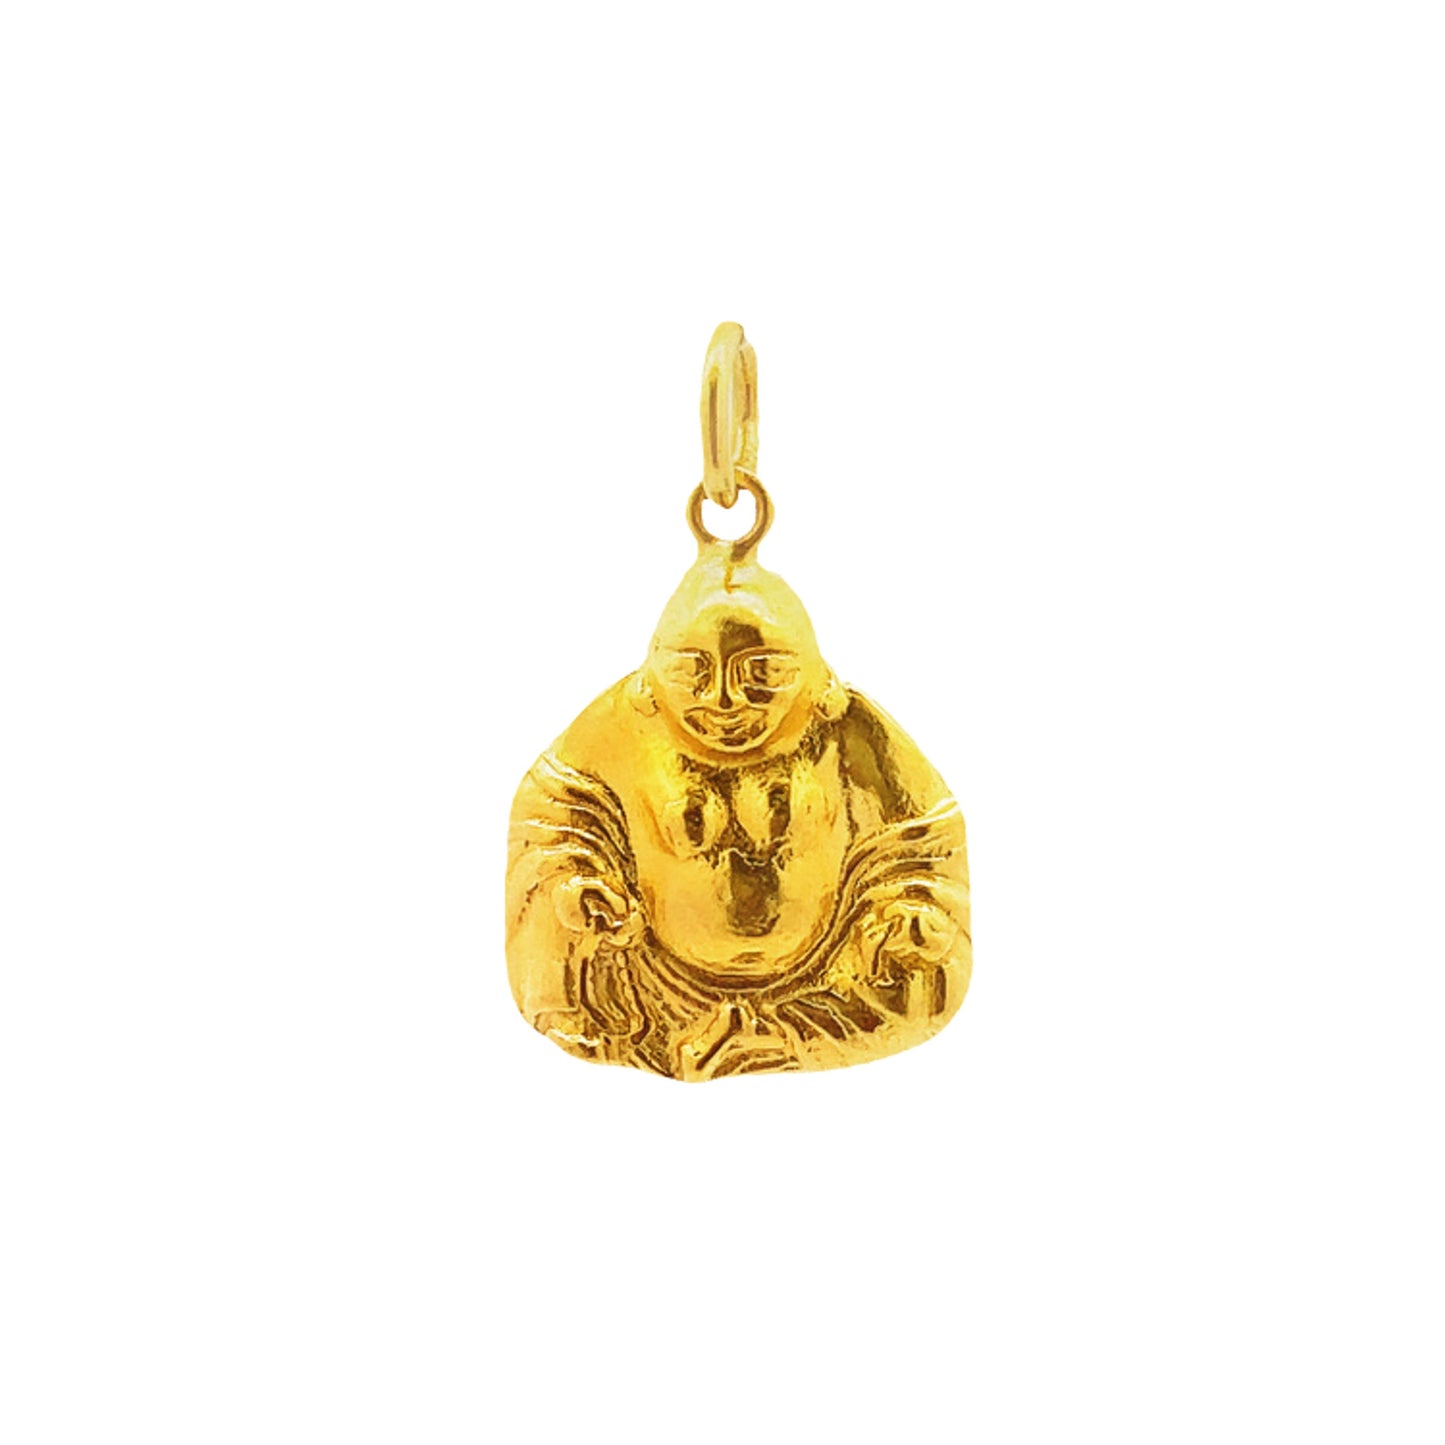 GOLD PENDANT ( 22K ) ( 2.71g ) - 0005743 Chain sold separately